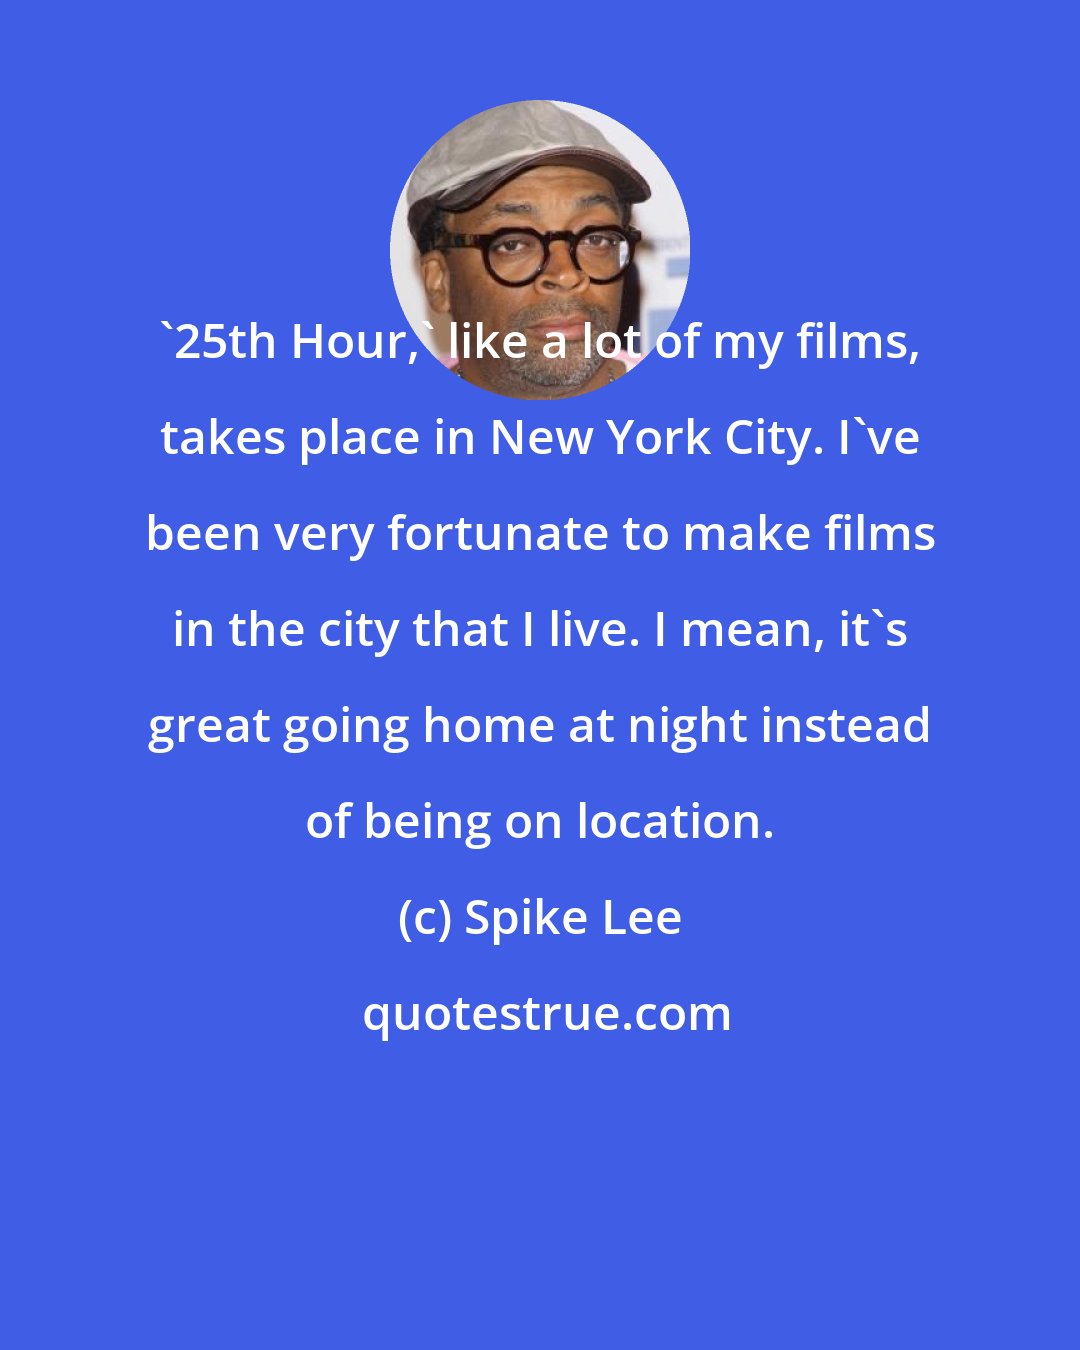 Spike Lee: '25th Hour,' like a lot of my films, takes place in New York City. I've been very fortunate to make films in the city that I live. I mean, it's great going home at night instead of being on location.